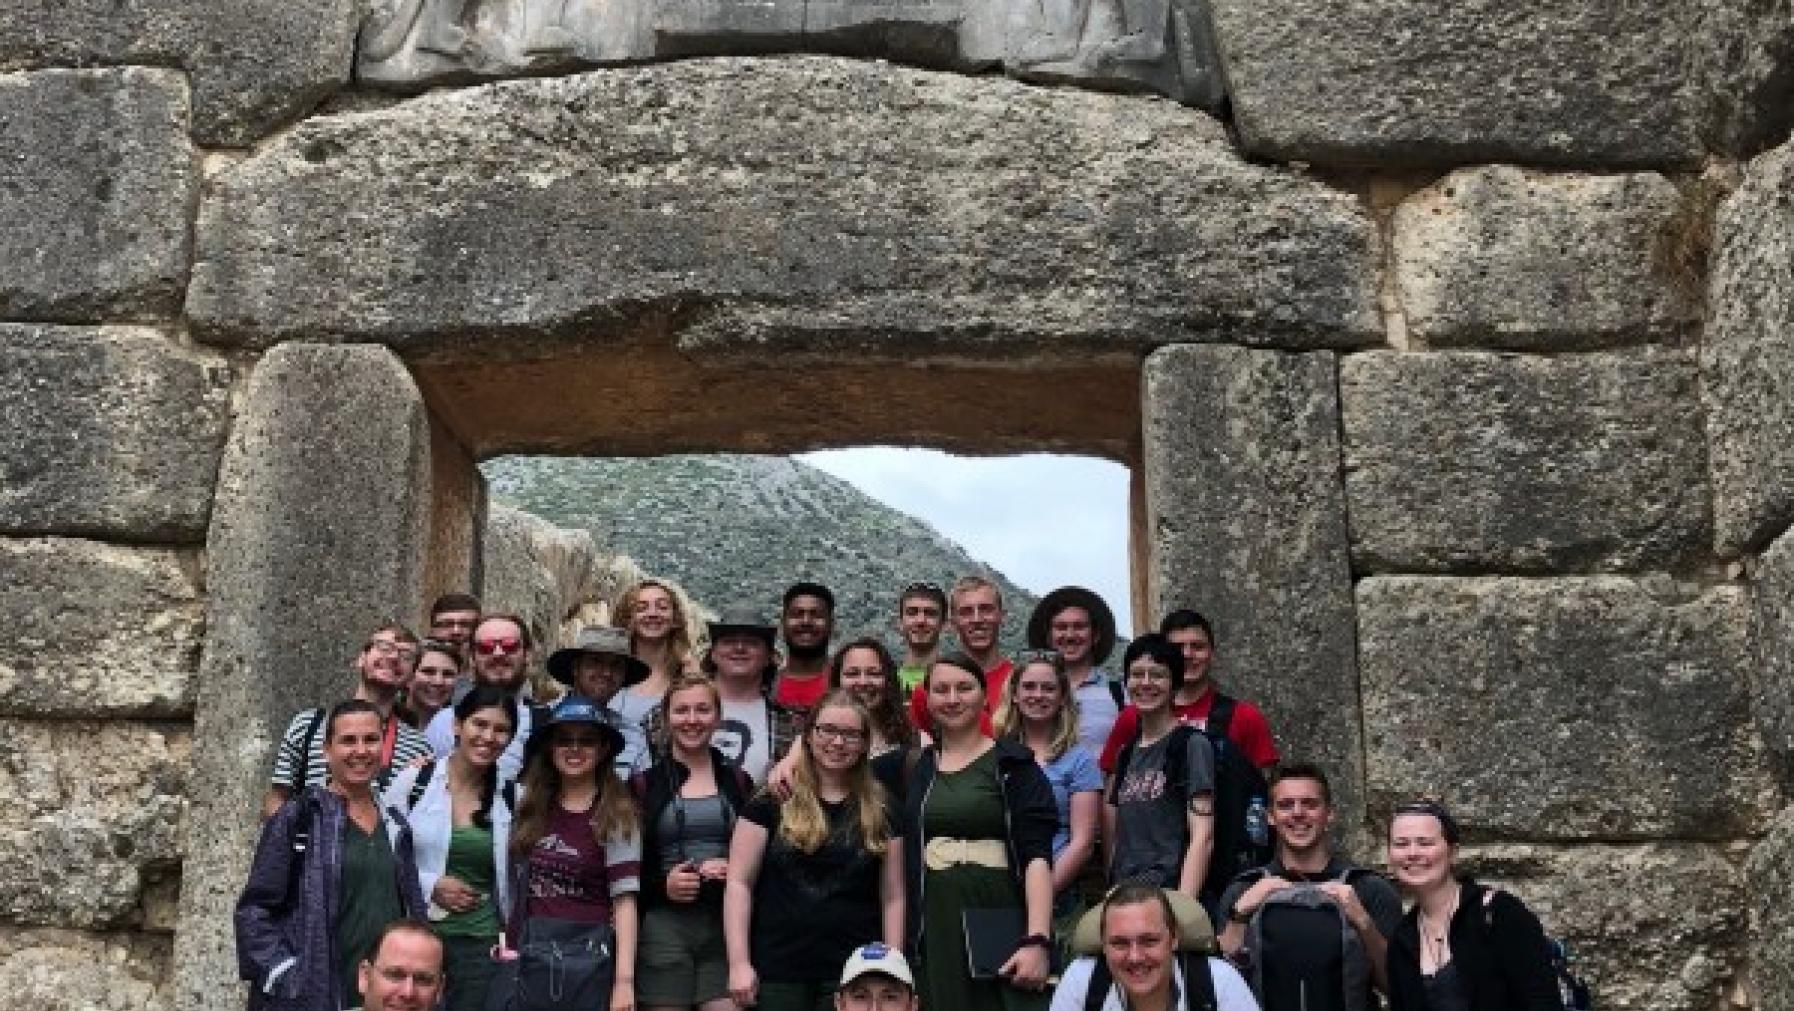 Students posing in front of Greek ruins